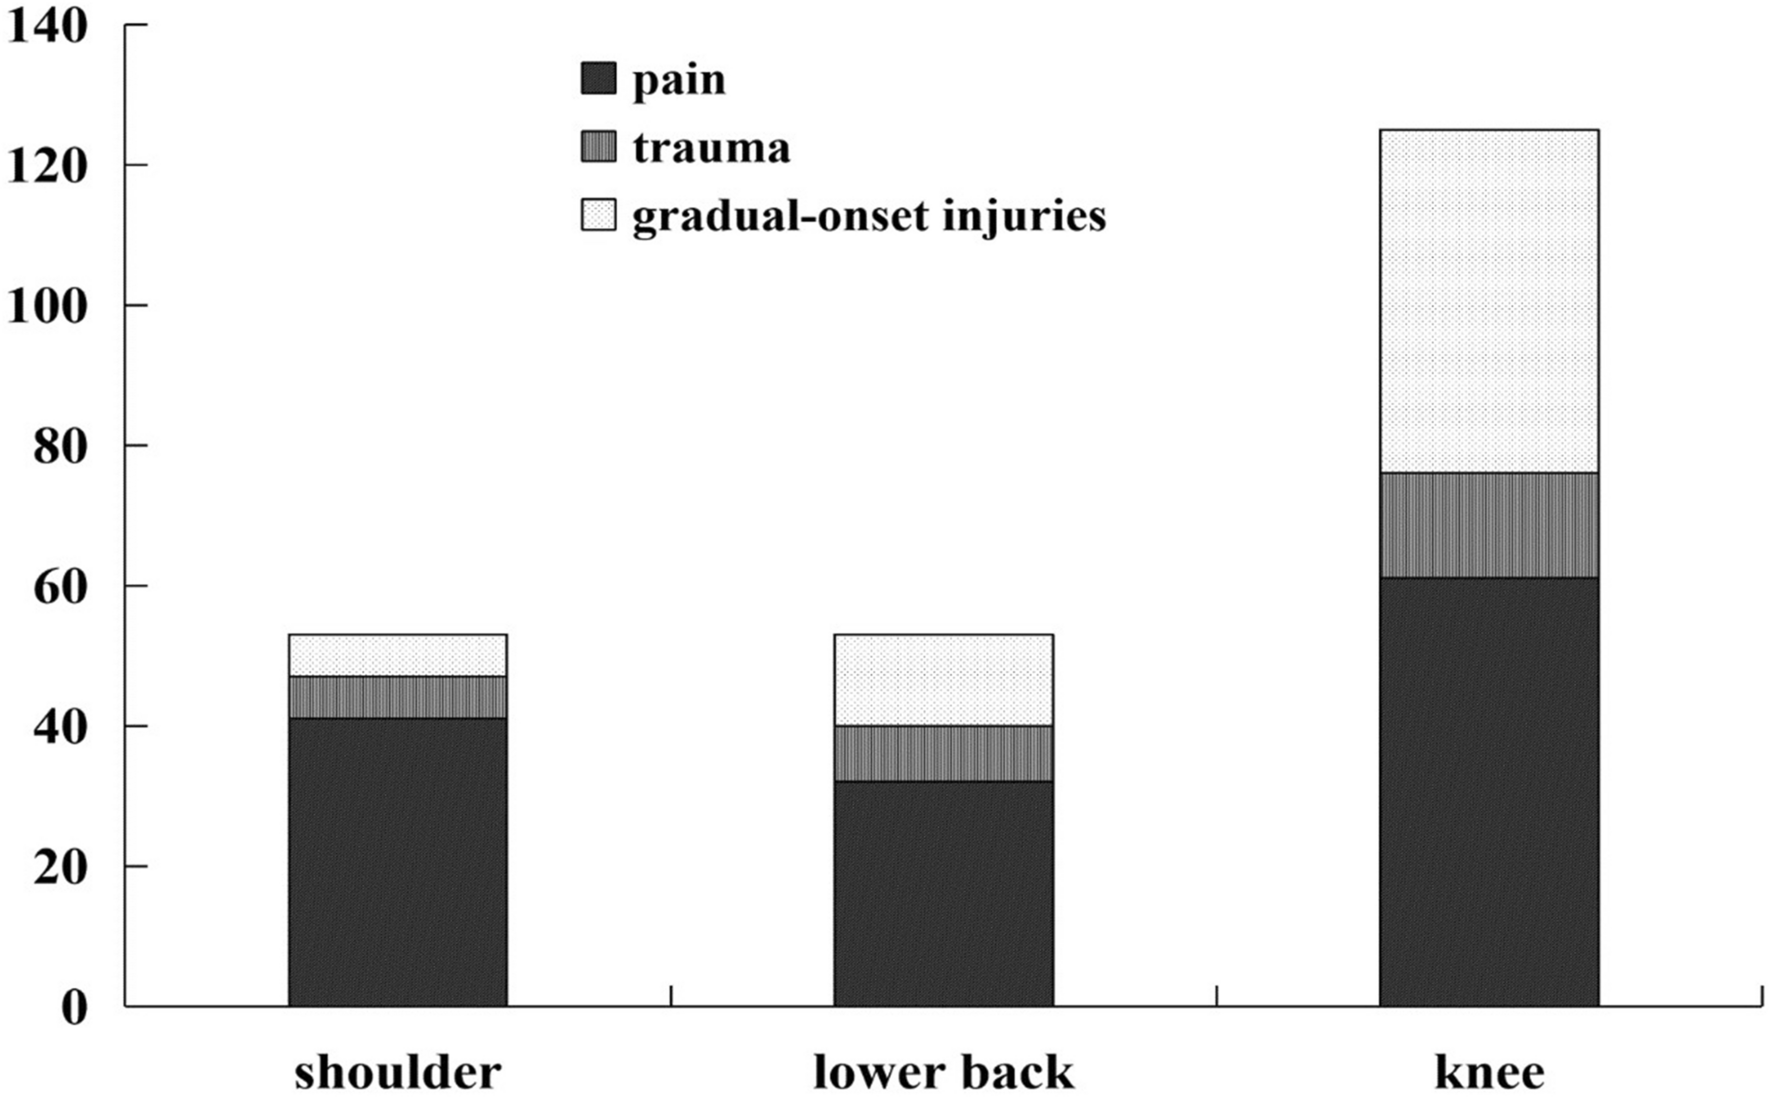 Epidemiology and pain in elementary school-aged players: a survey of  Japanese badminton players participating in the national tournament |  Scientific Reports